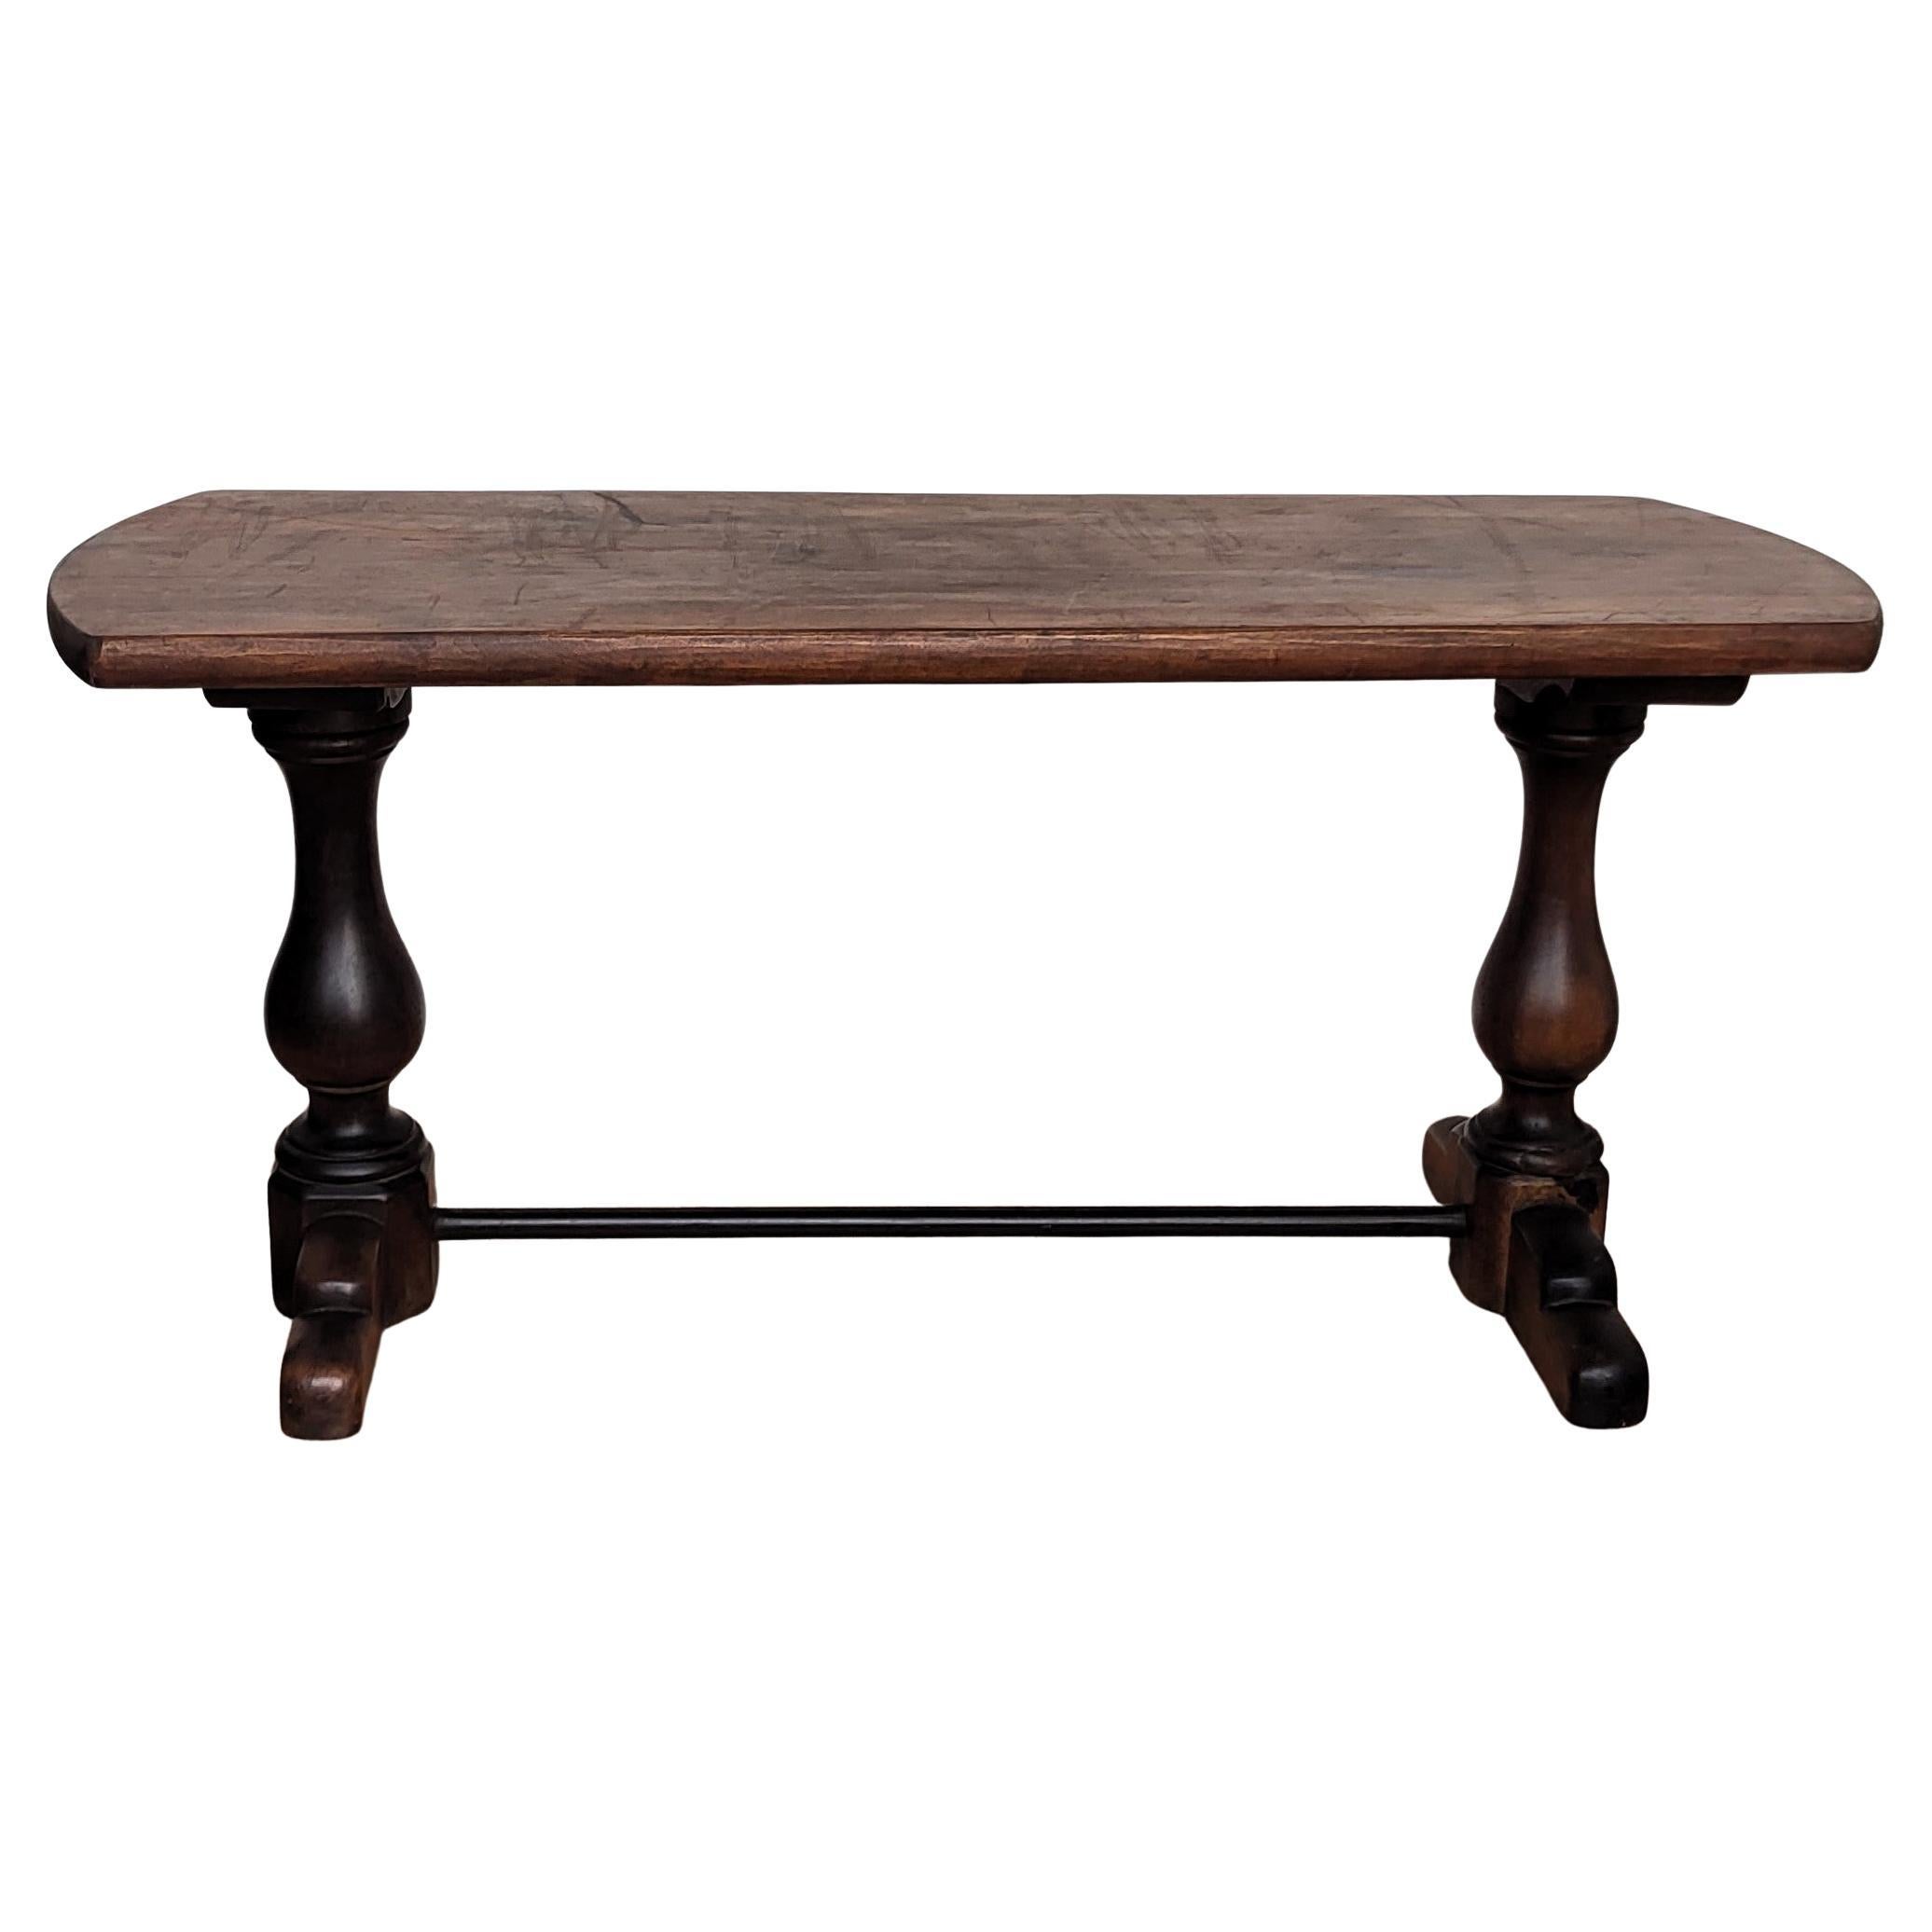 Antique Refectory Italian Solid Wooden Table For Sale